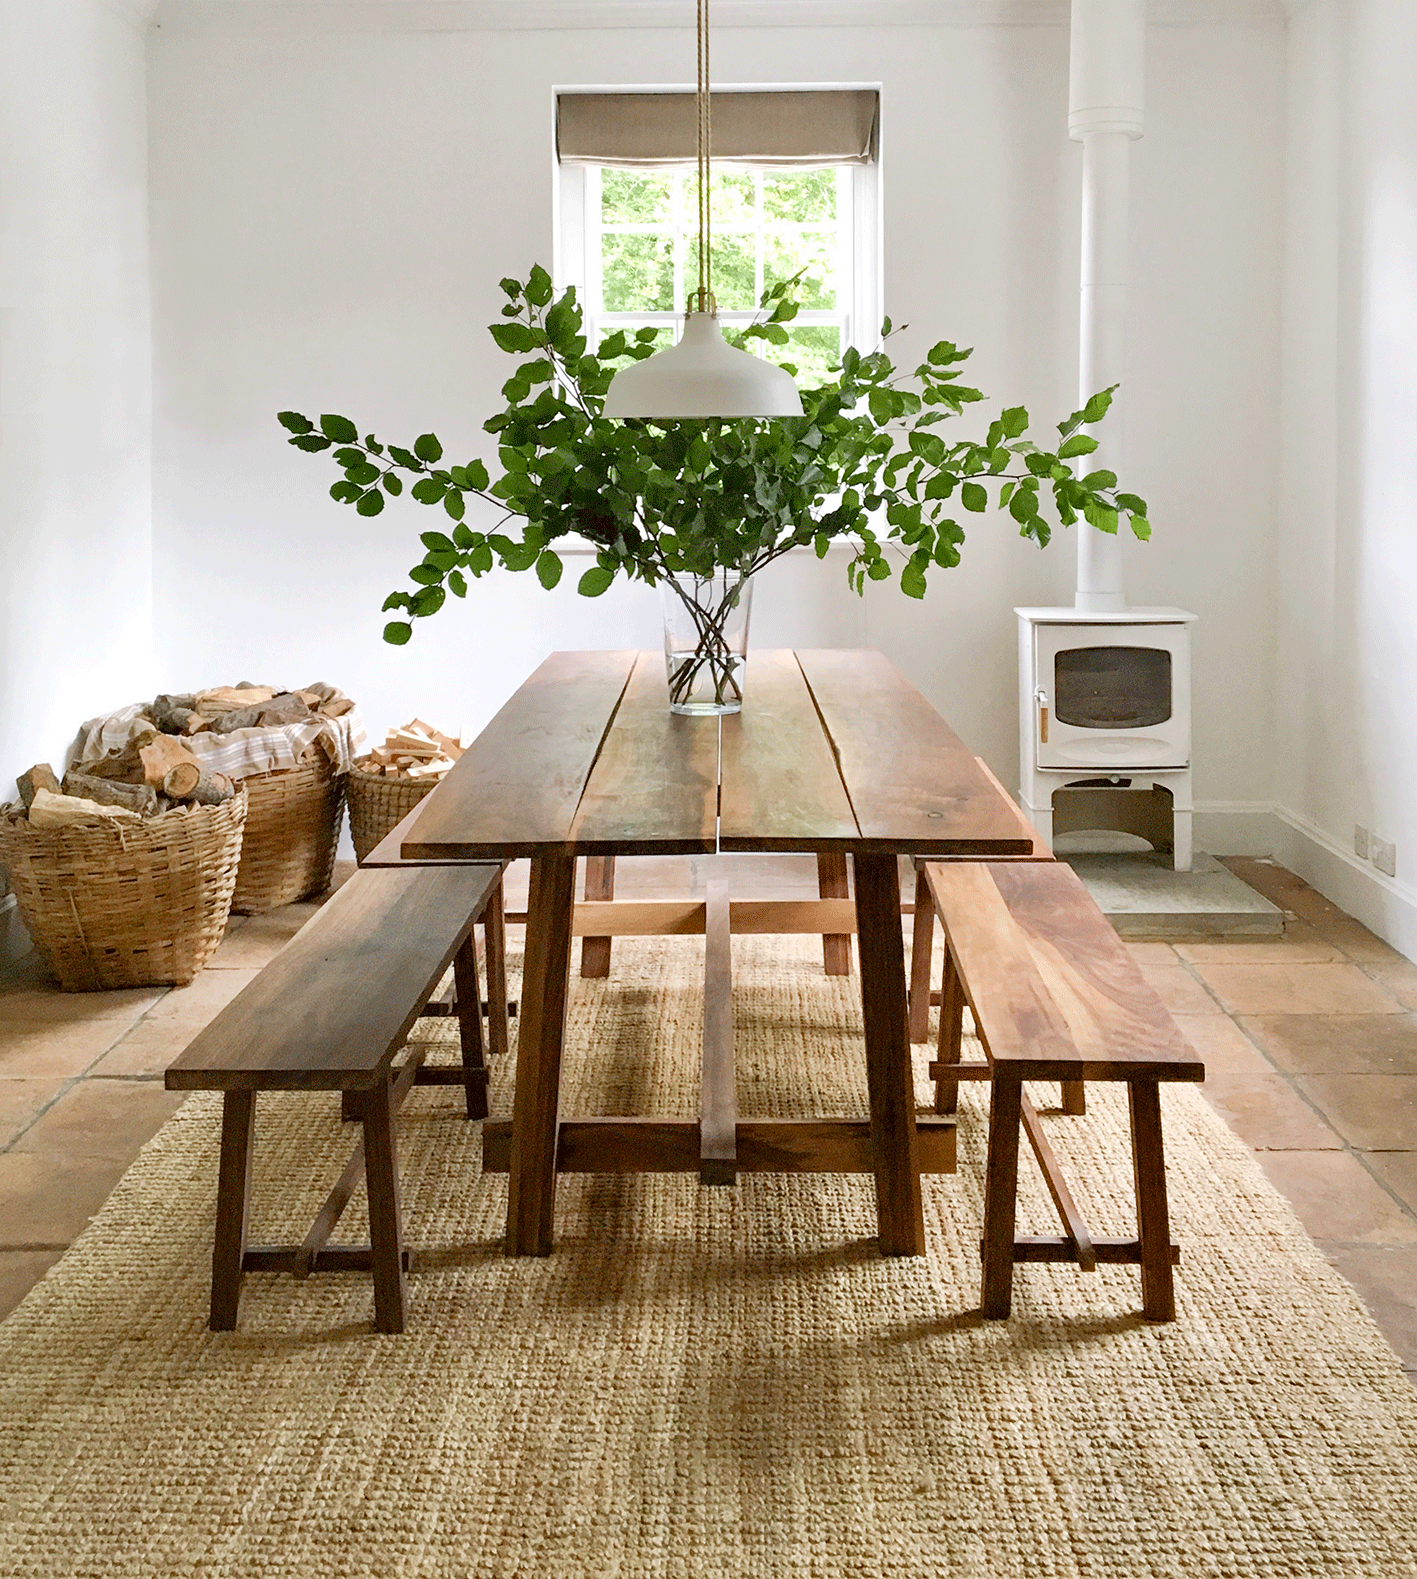 Traditional farmhouse kitchen dining room table. Rustic kitchen table. #farmhous…